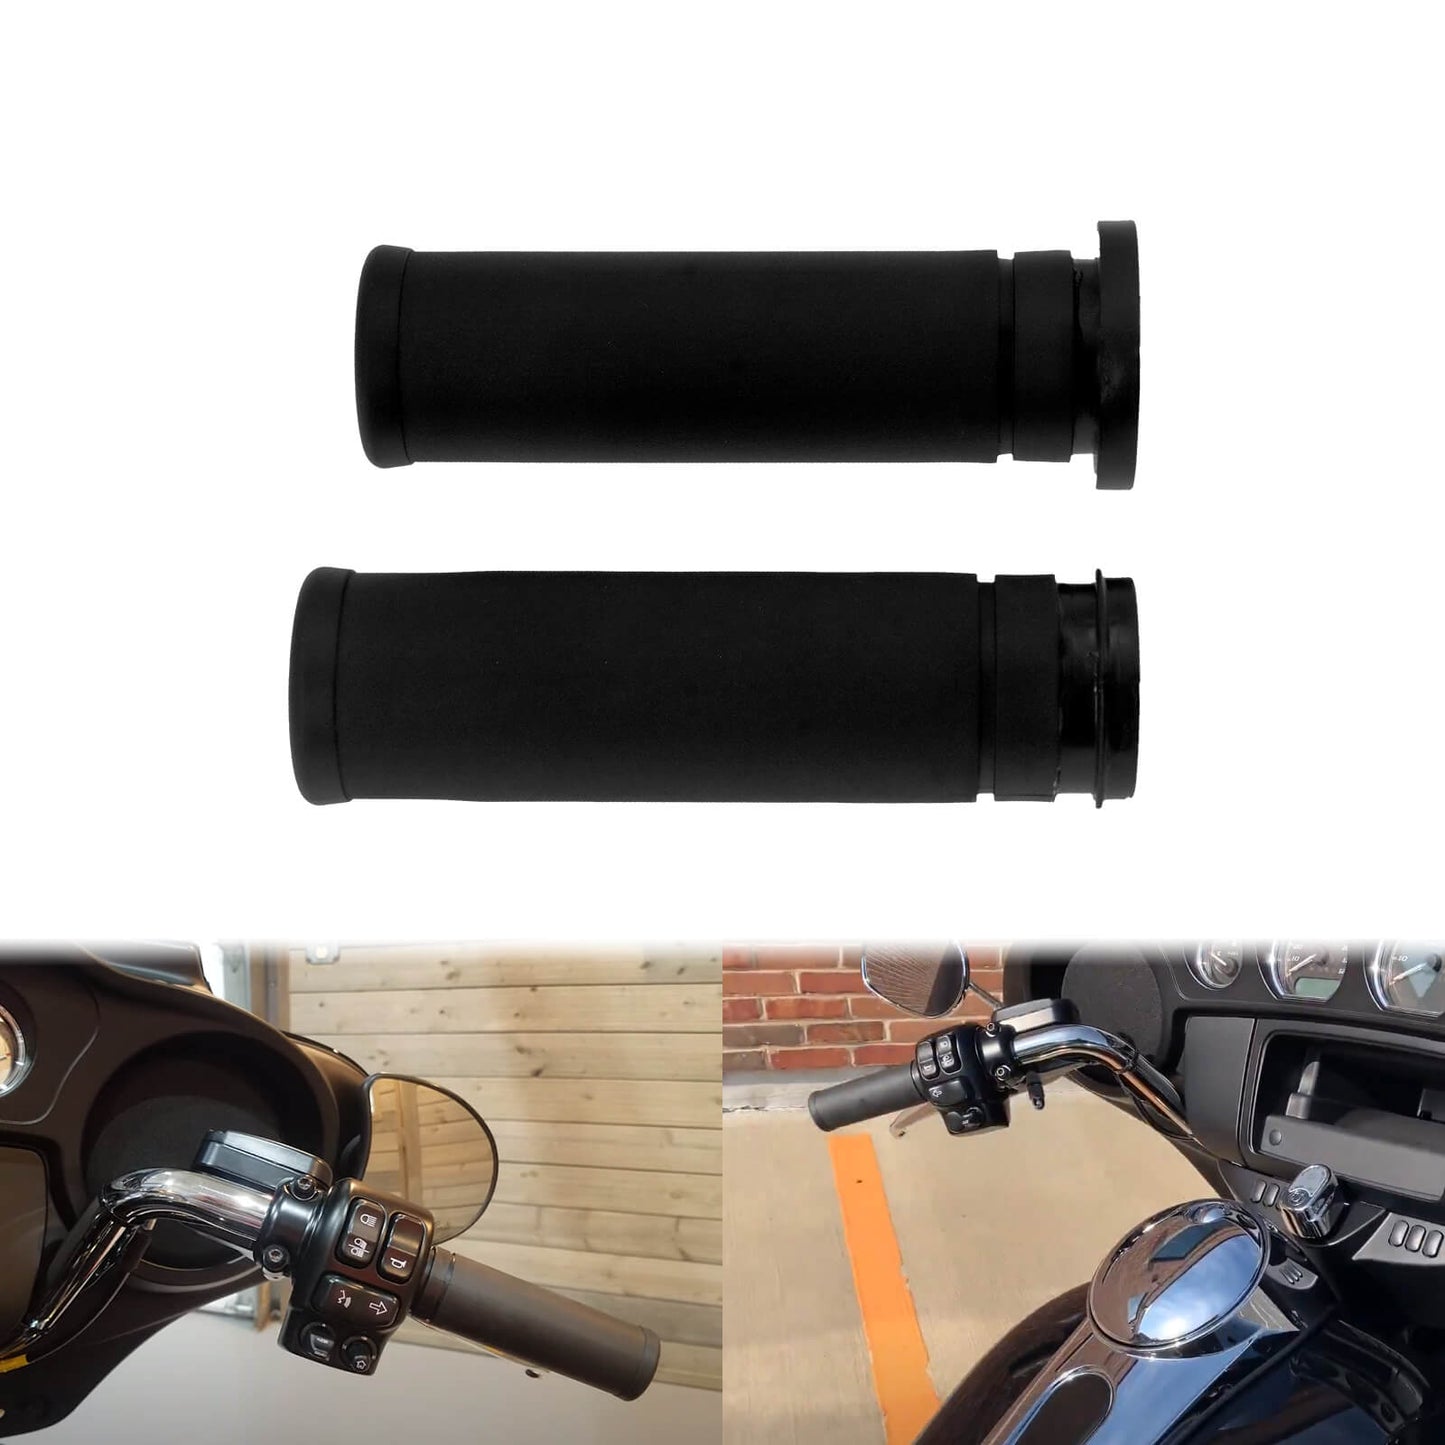 Mactions Black Rubber Hand Grips for Harley Touring Street Glide GP006002